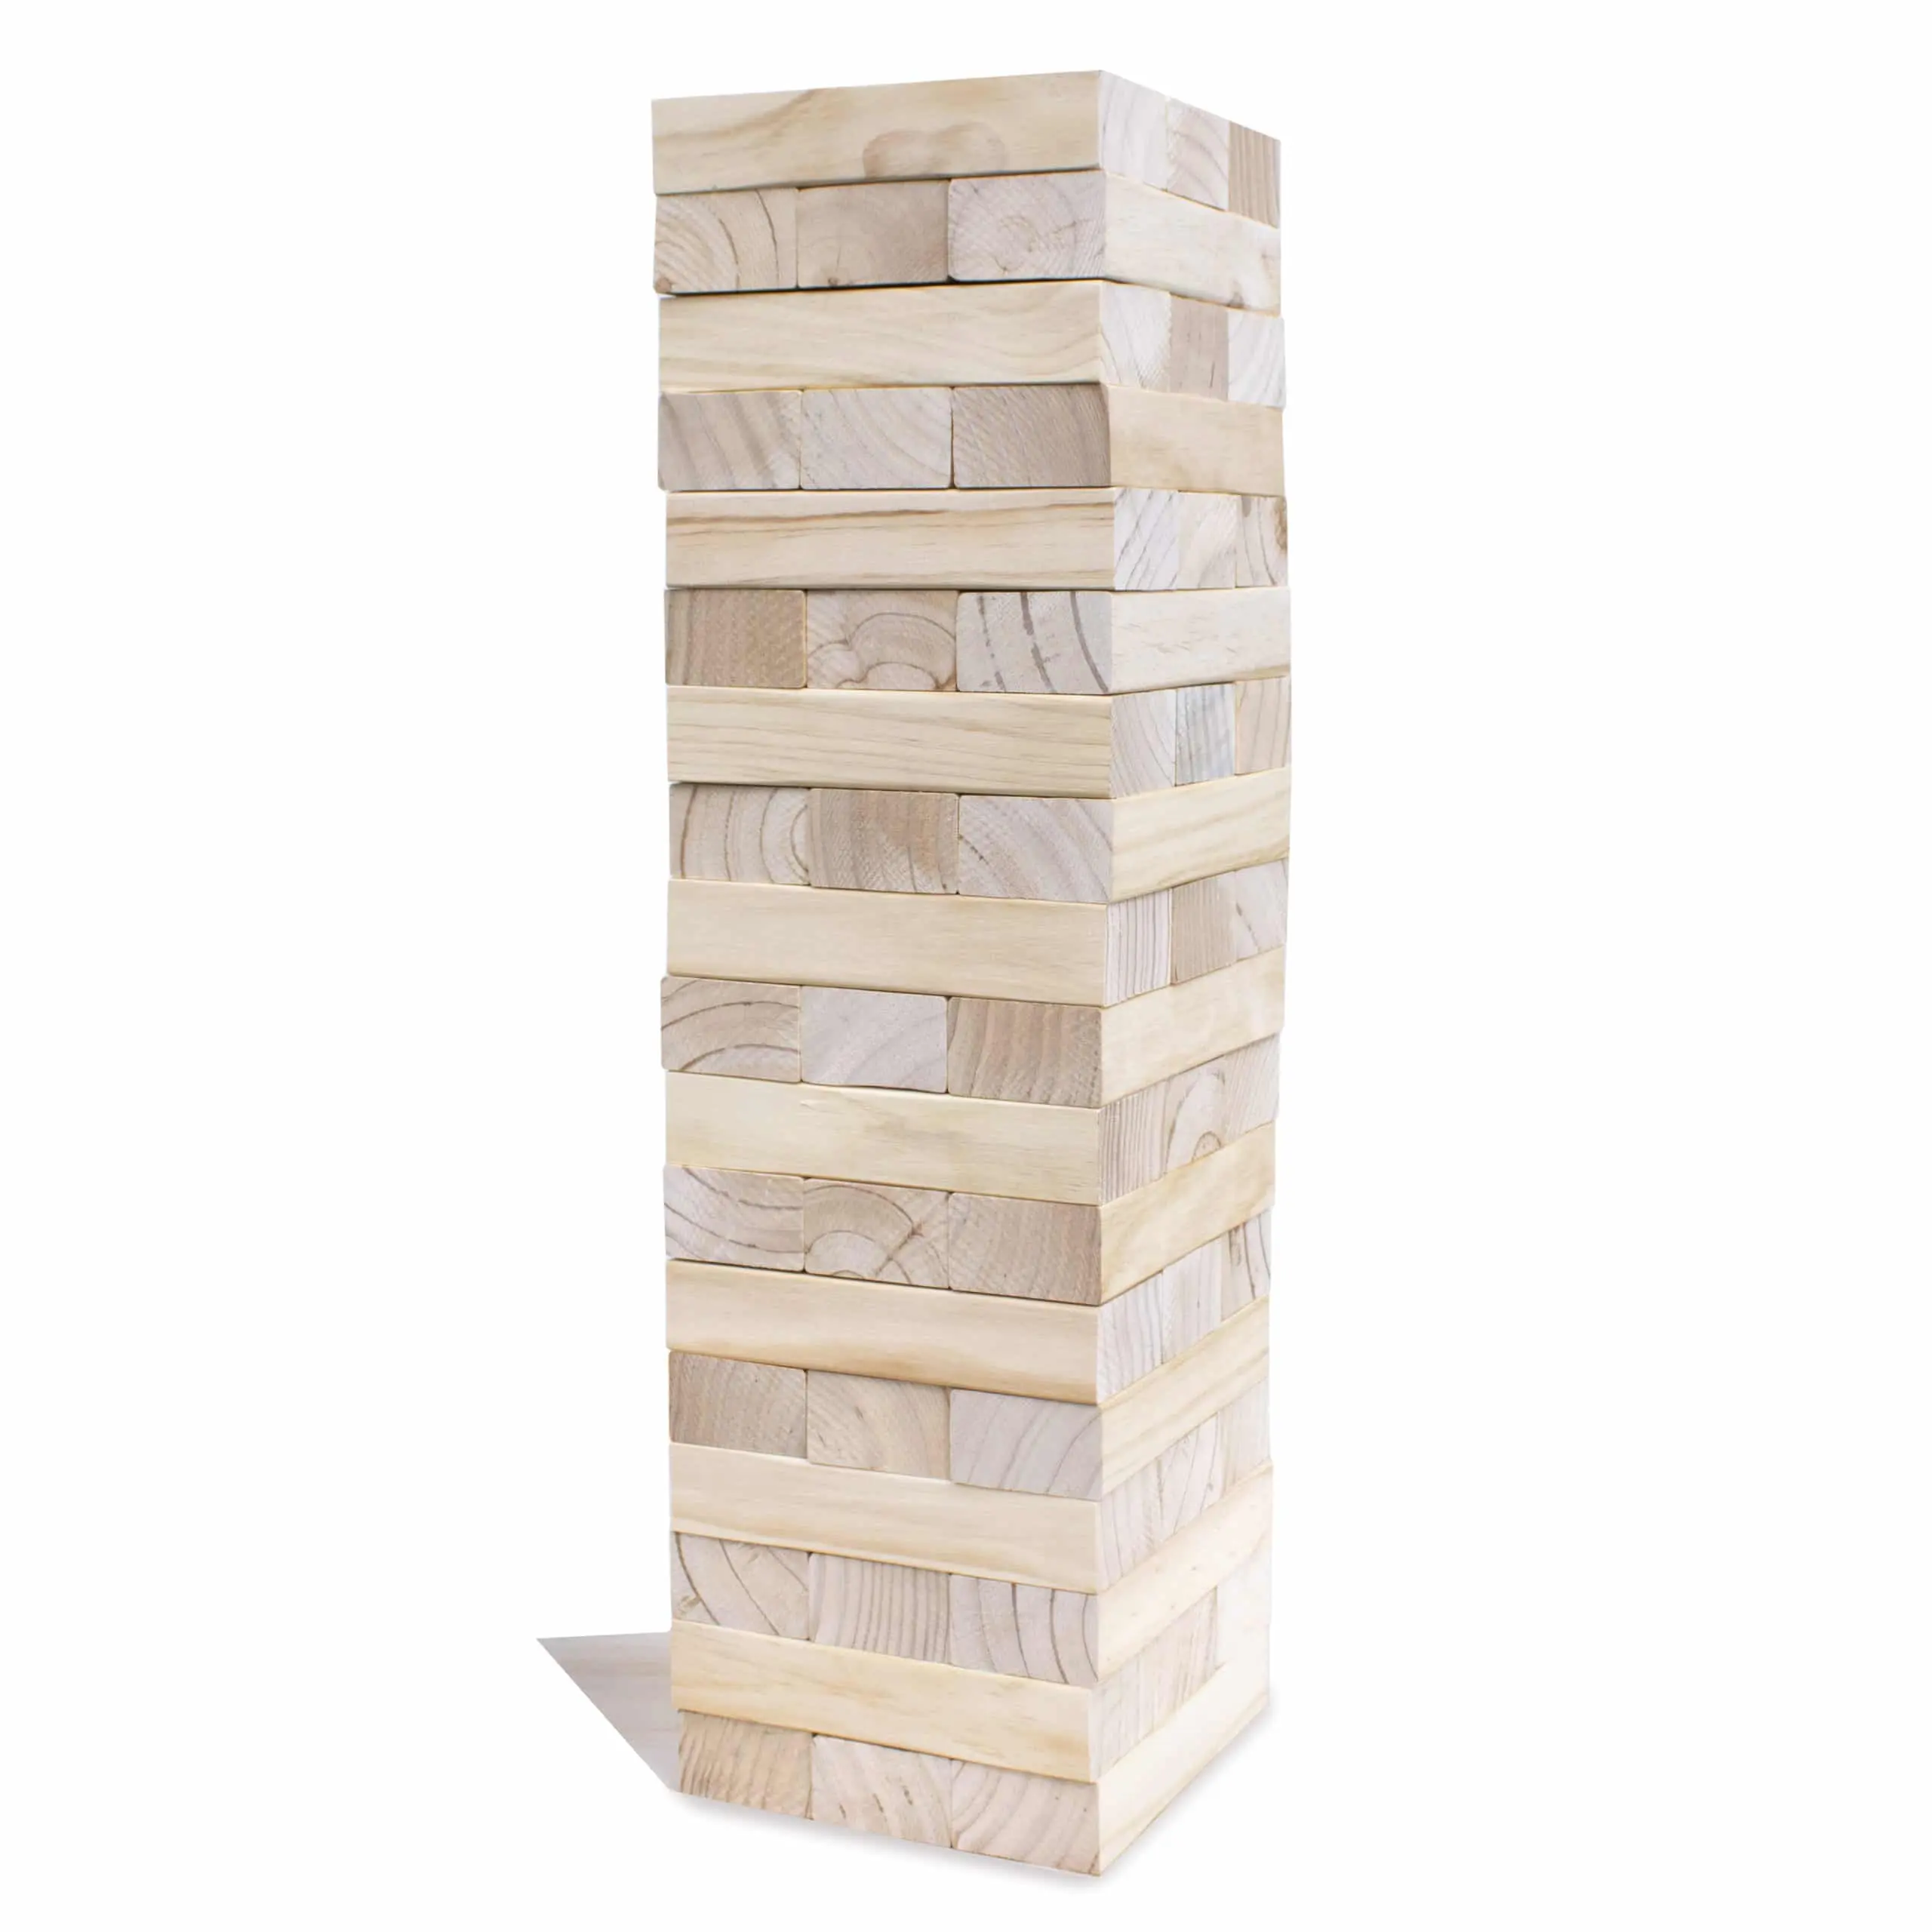 Wooden Jumbo Huge Building Blocks for Outdoor Classic Game ,Giant Tumbling Tower